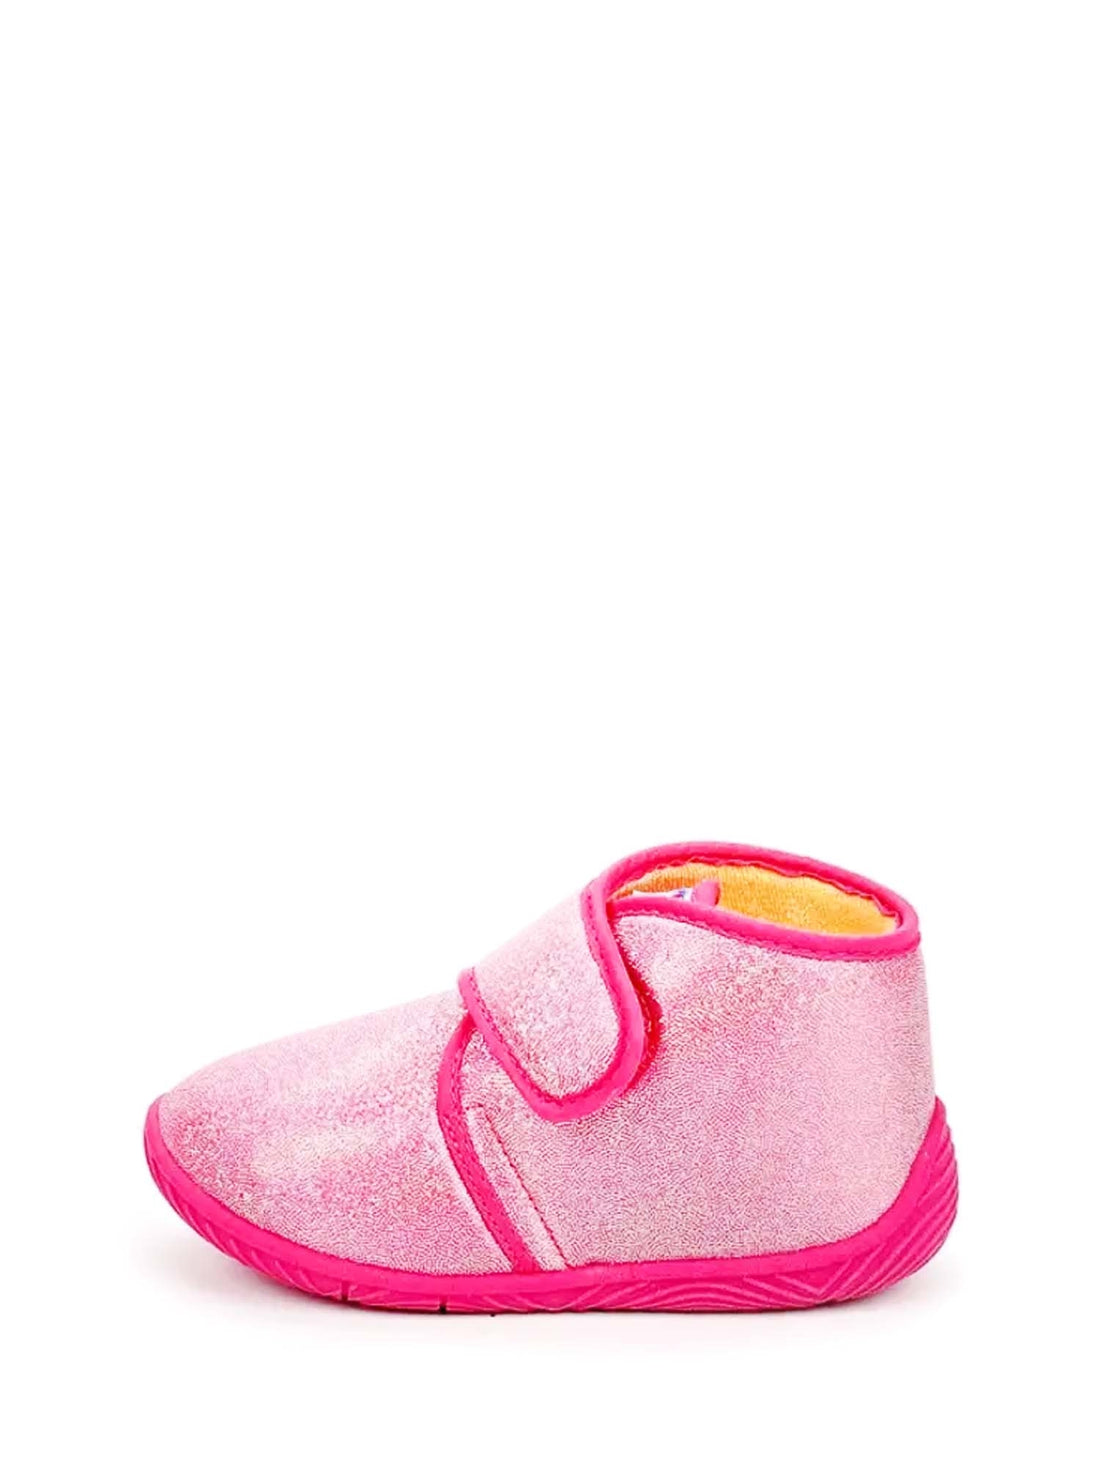 Pantofole Rosa Chicco